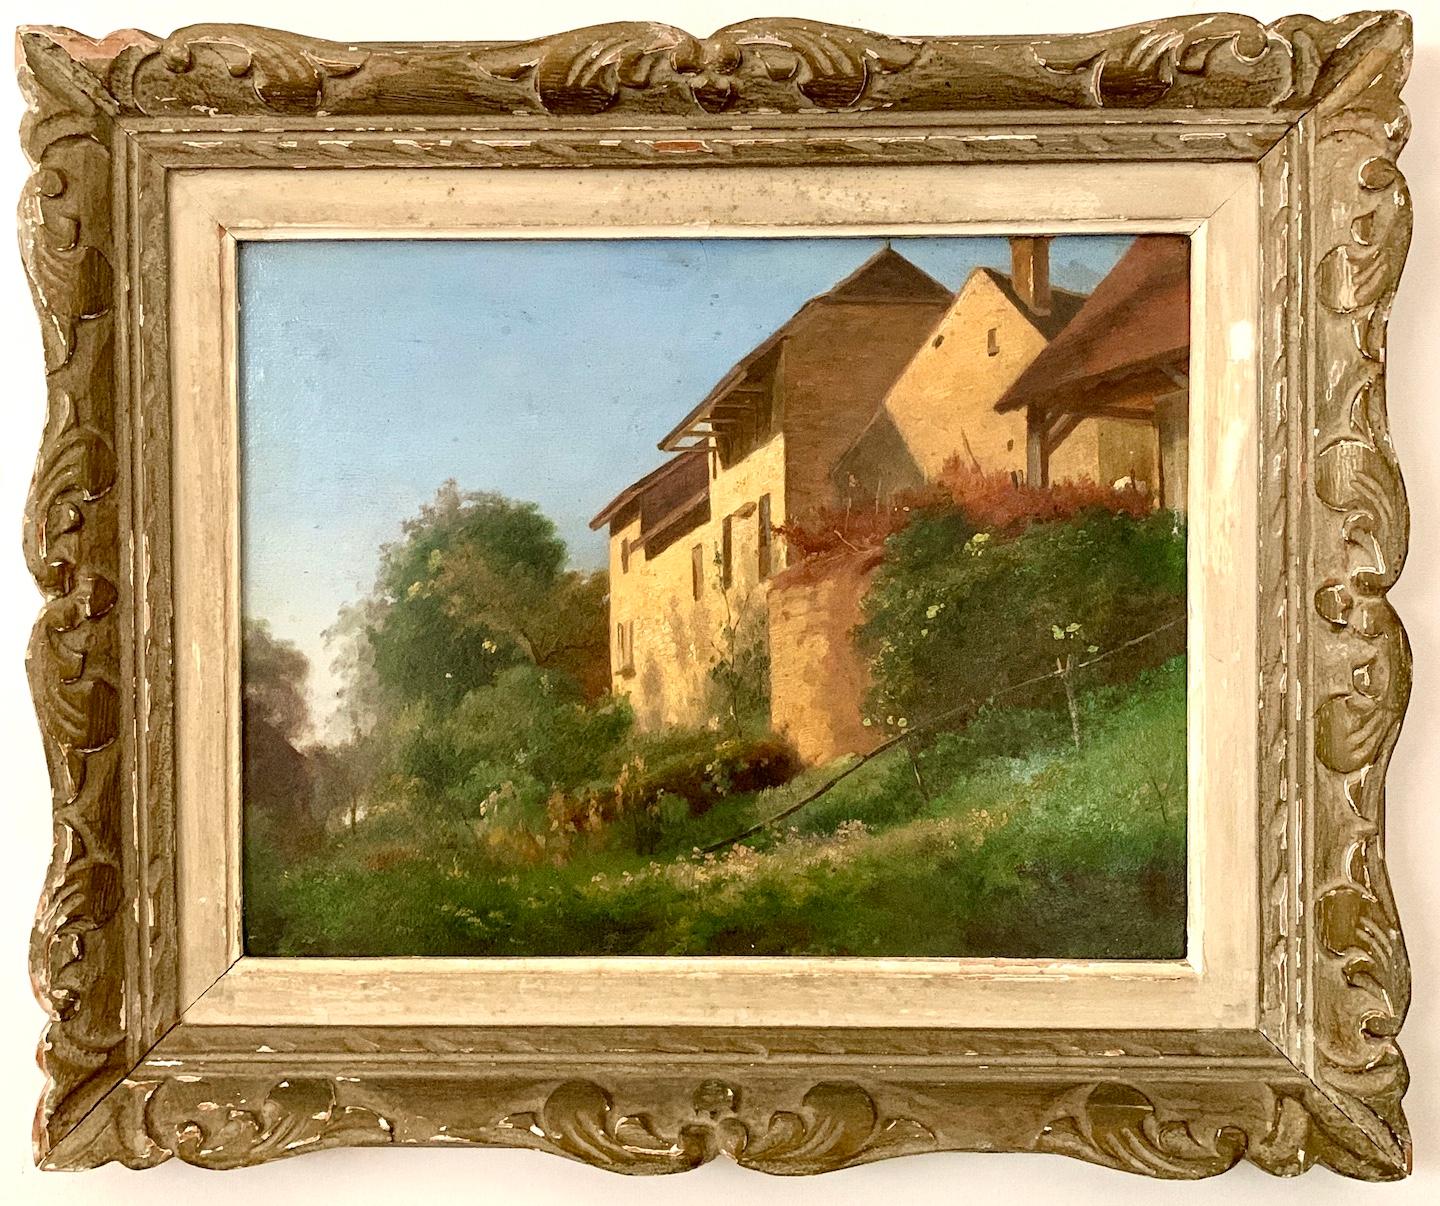 19th century French School Landscape Painting - 19th century French traditional and Impressionist landscape with farmhouse